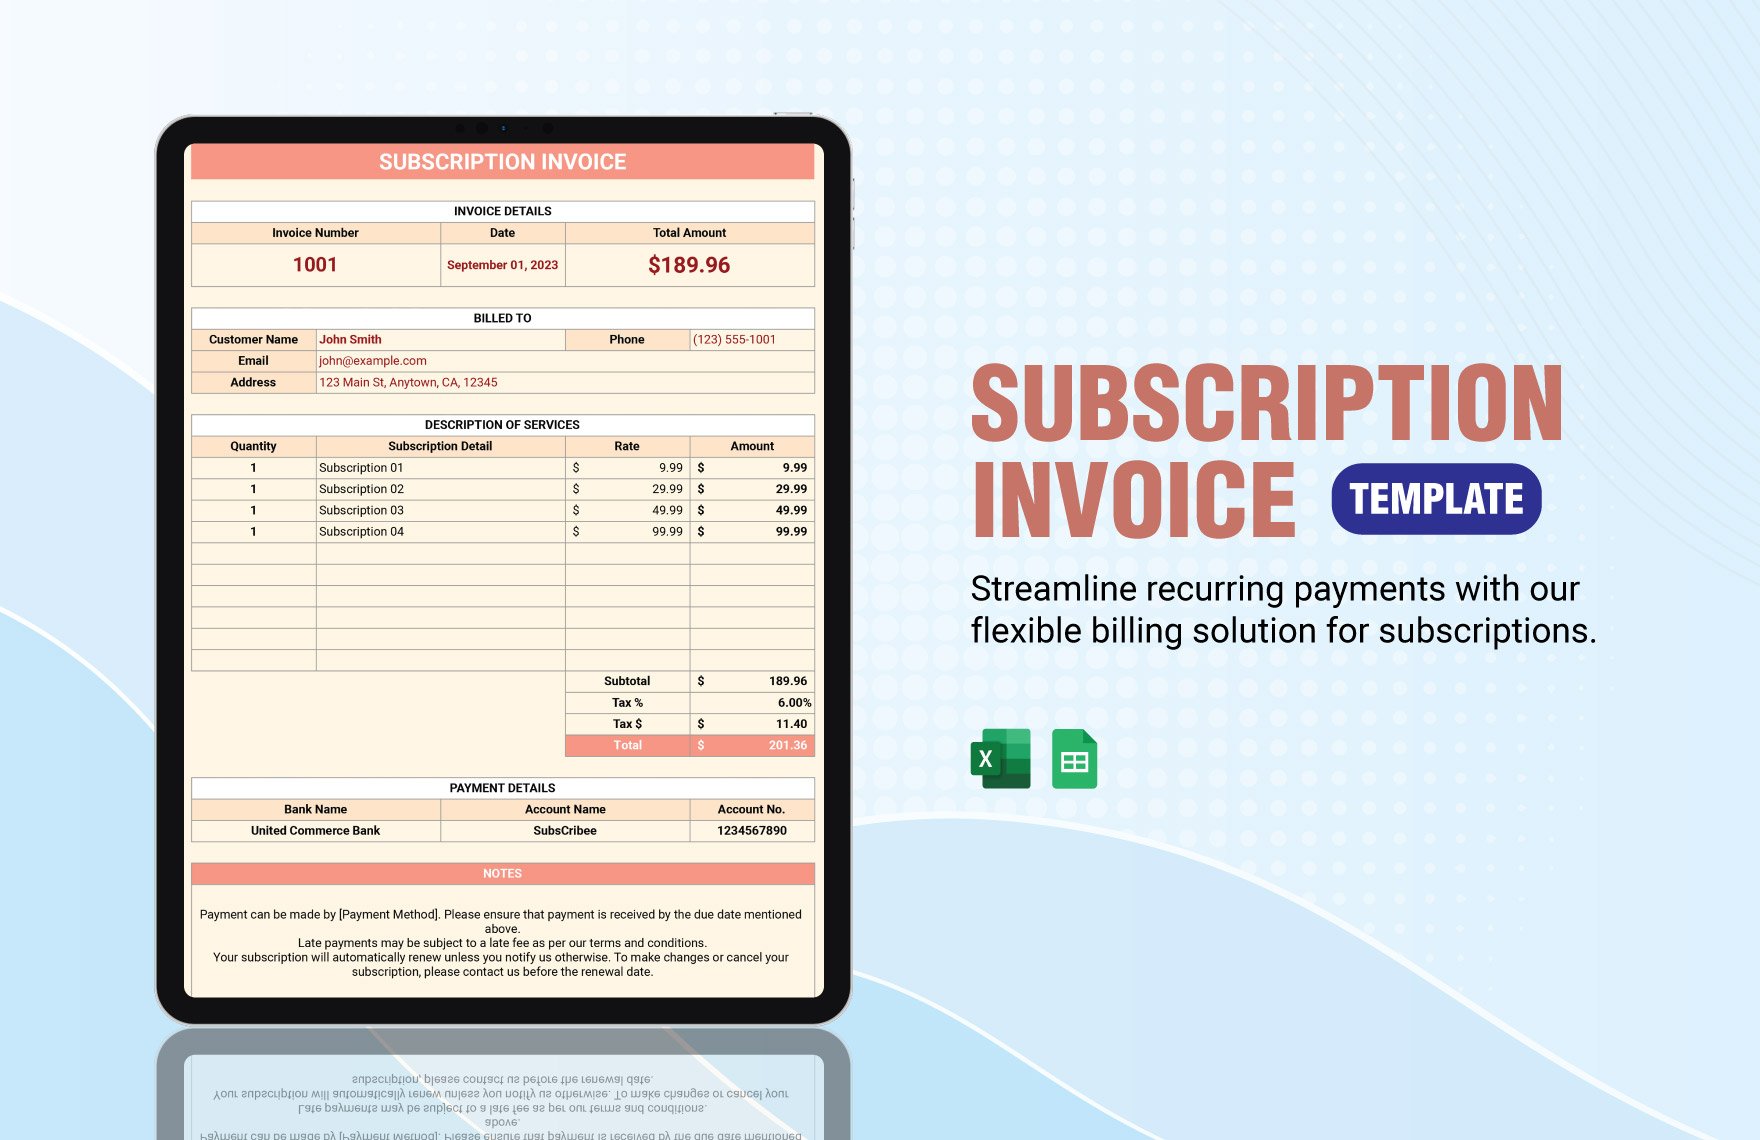 Subscription Invoice Template in Excel, Google Sheets